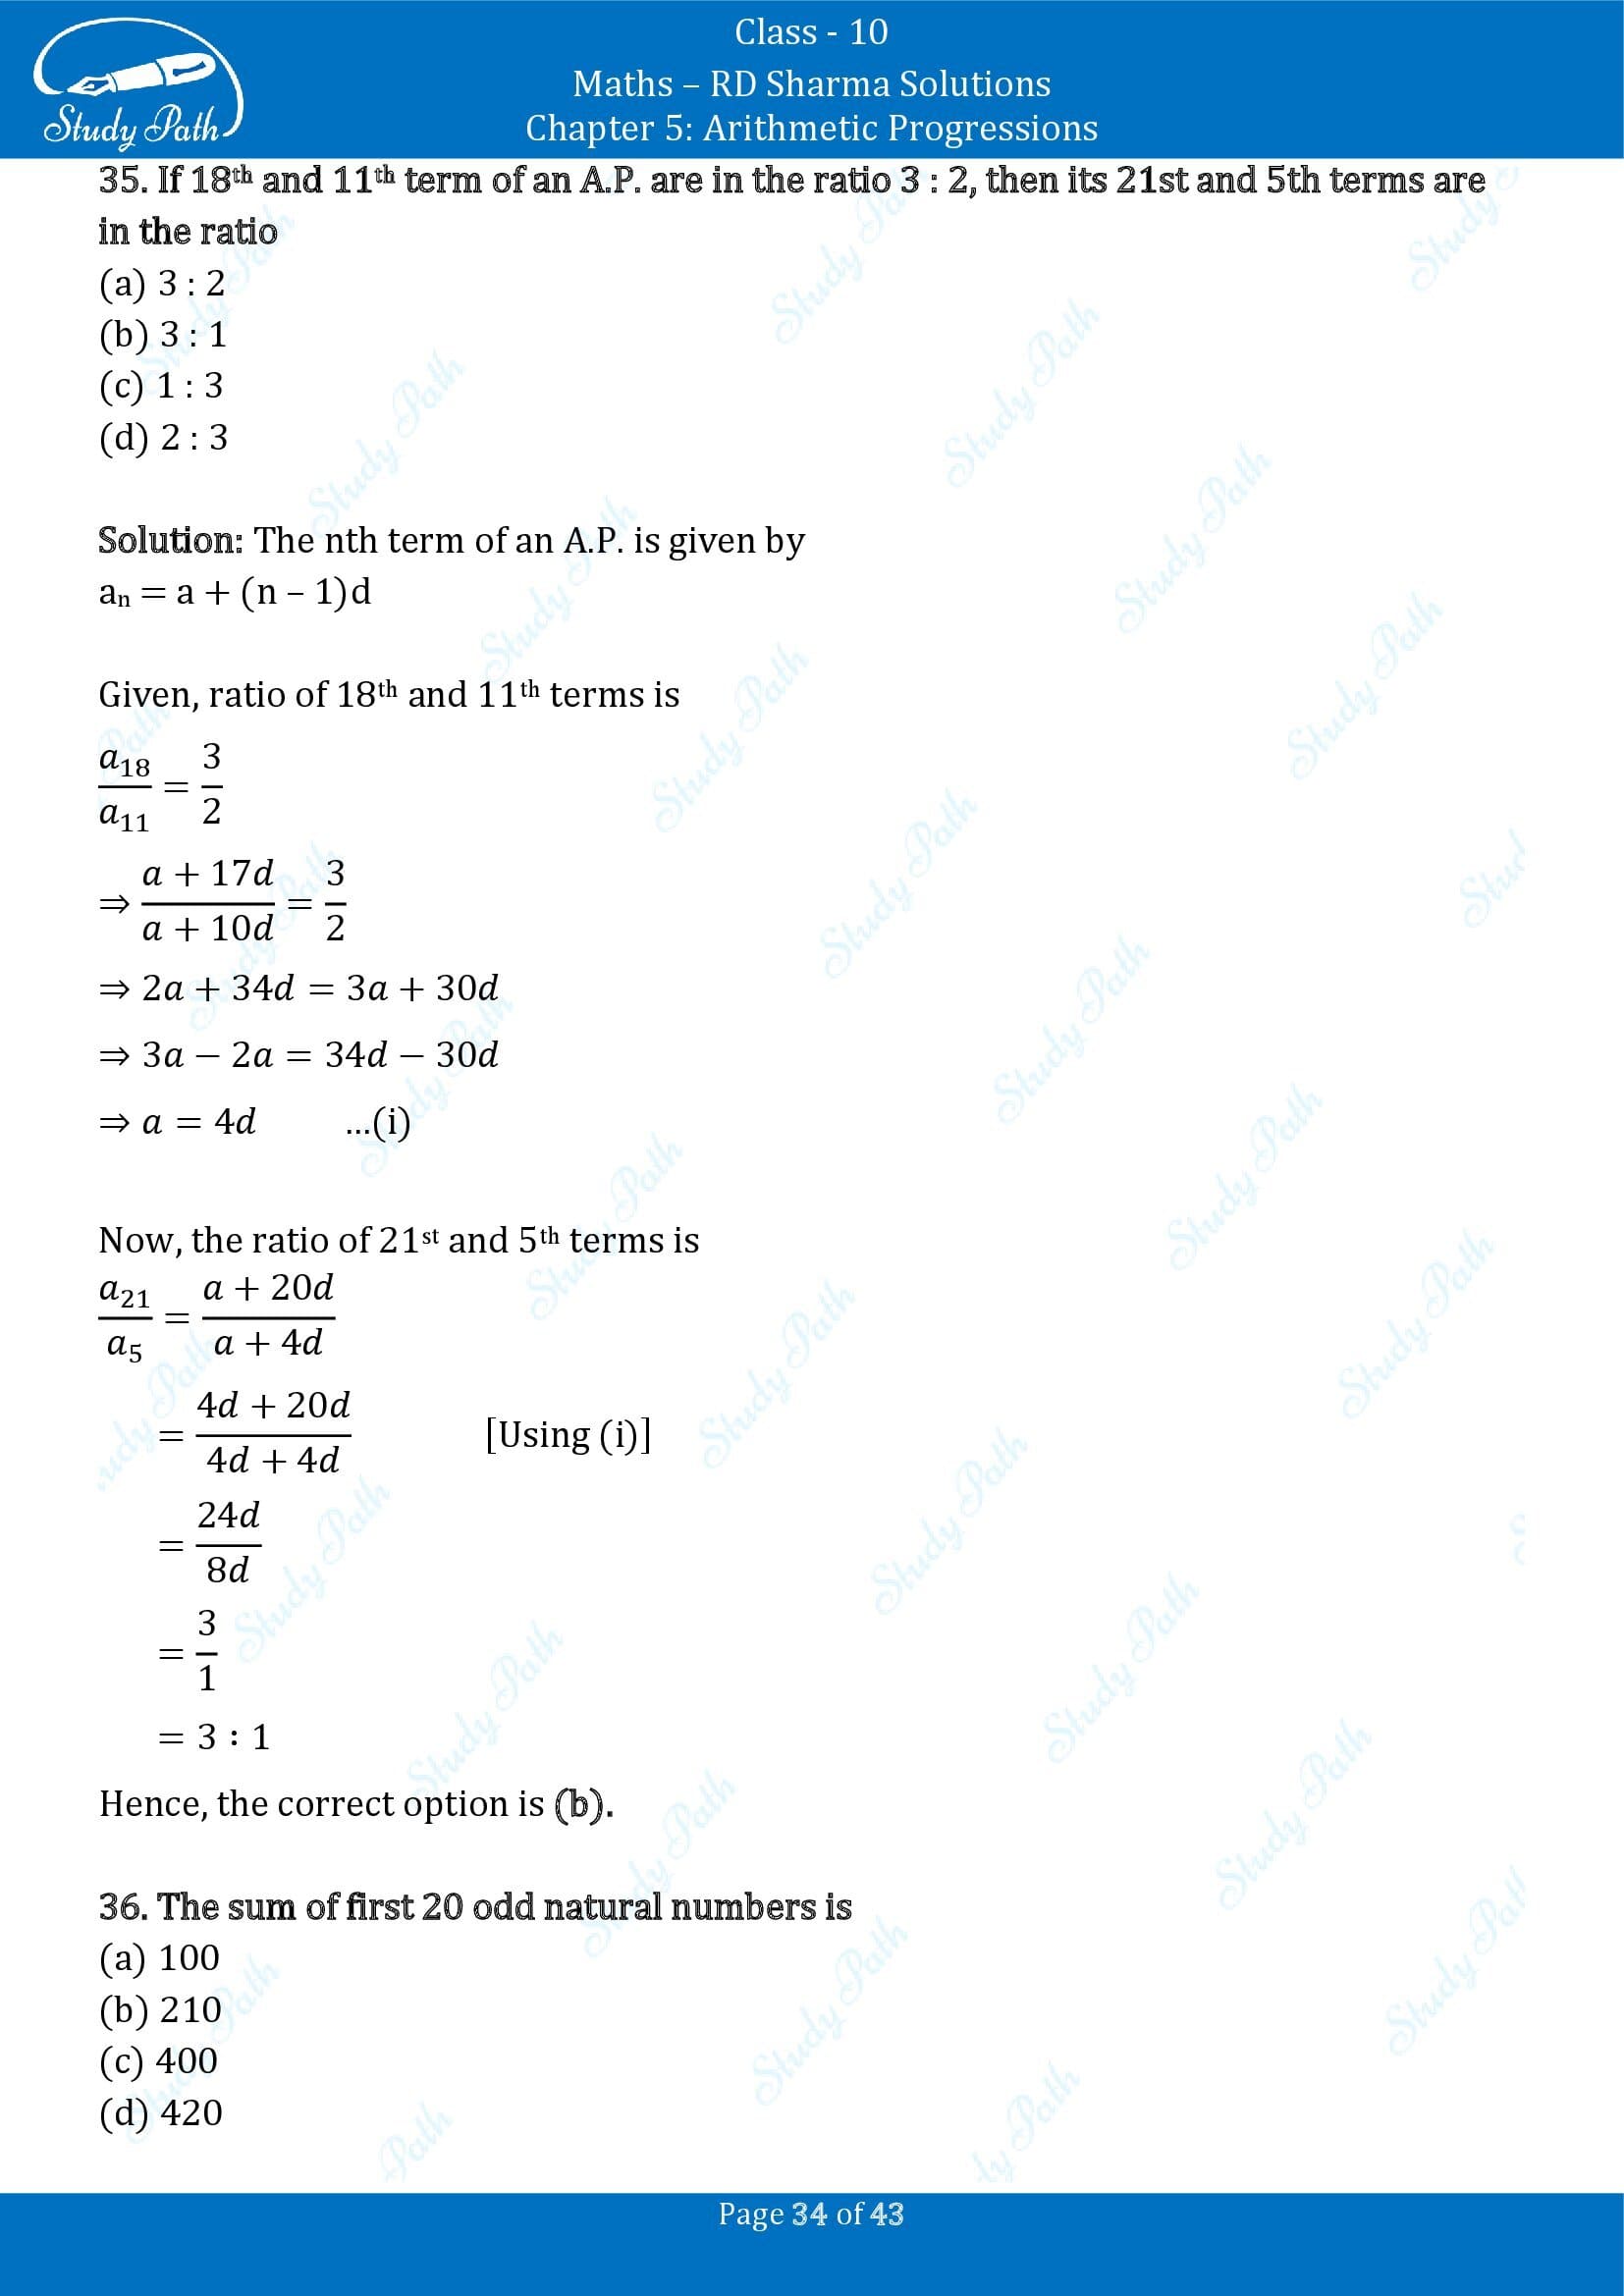 RD Sharma Solutions Class 10 Chapter 5 Arithmetic Progressions Multiple Choice Question MCQs 00034